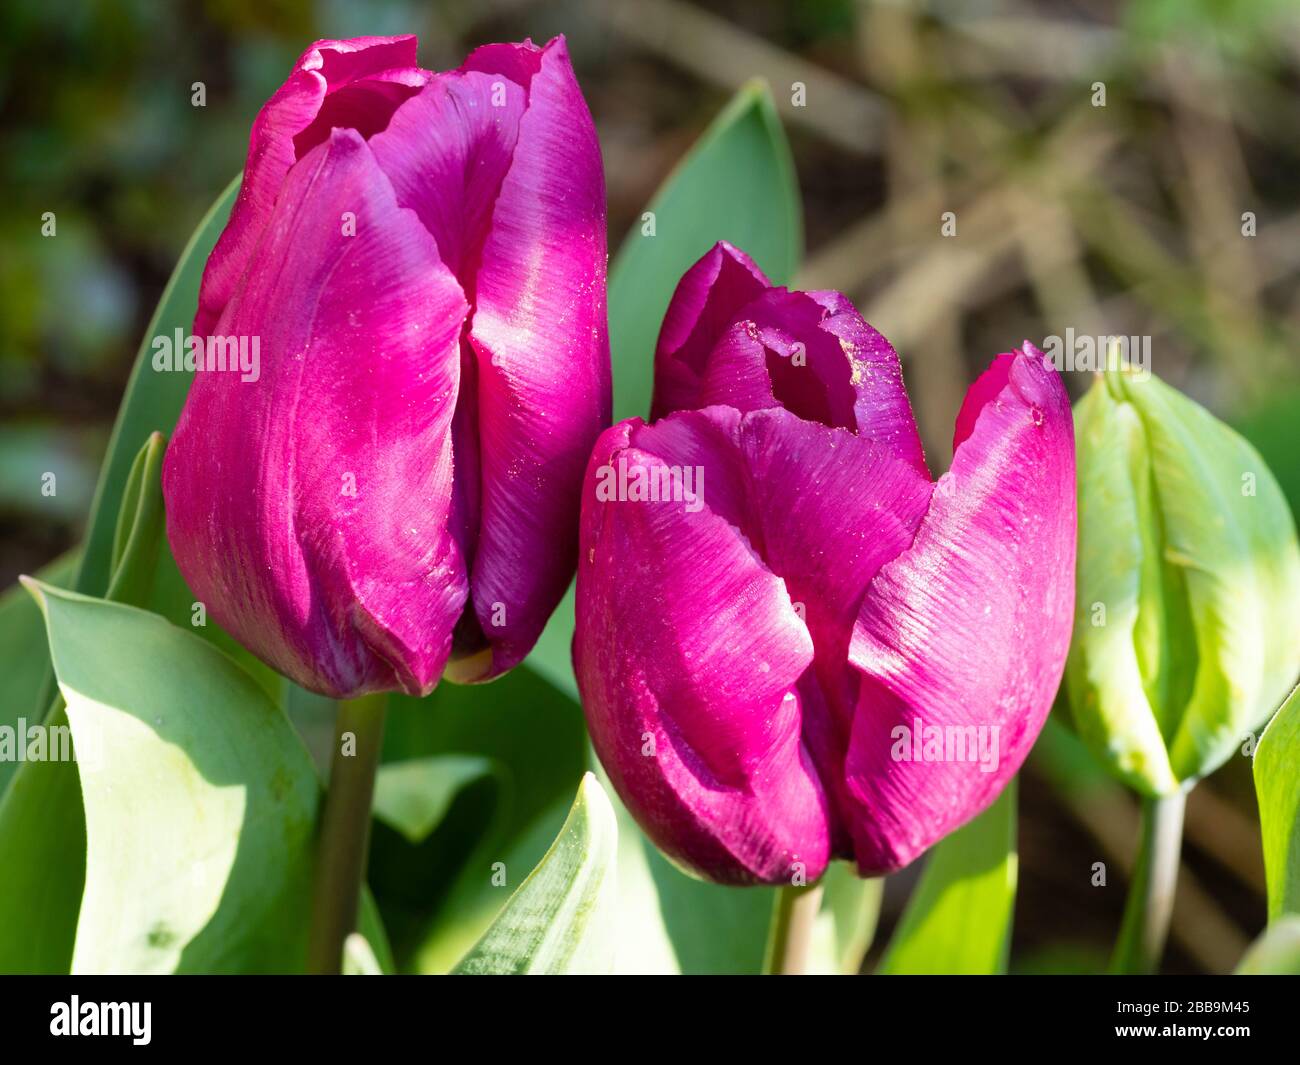 Classic vase shaped mid spring rose violet flowers of the hardy bulb, Tulip 'Blue Beauty' Stock Photo